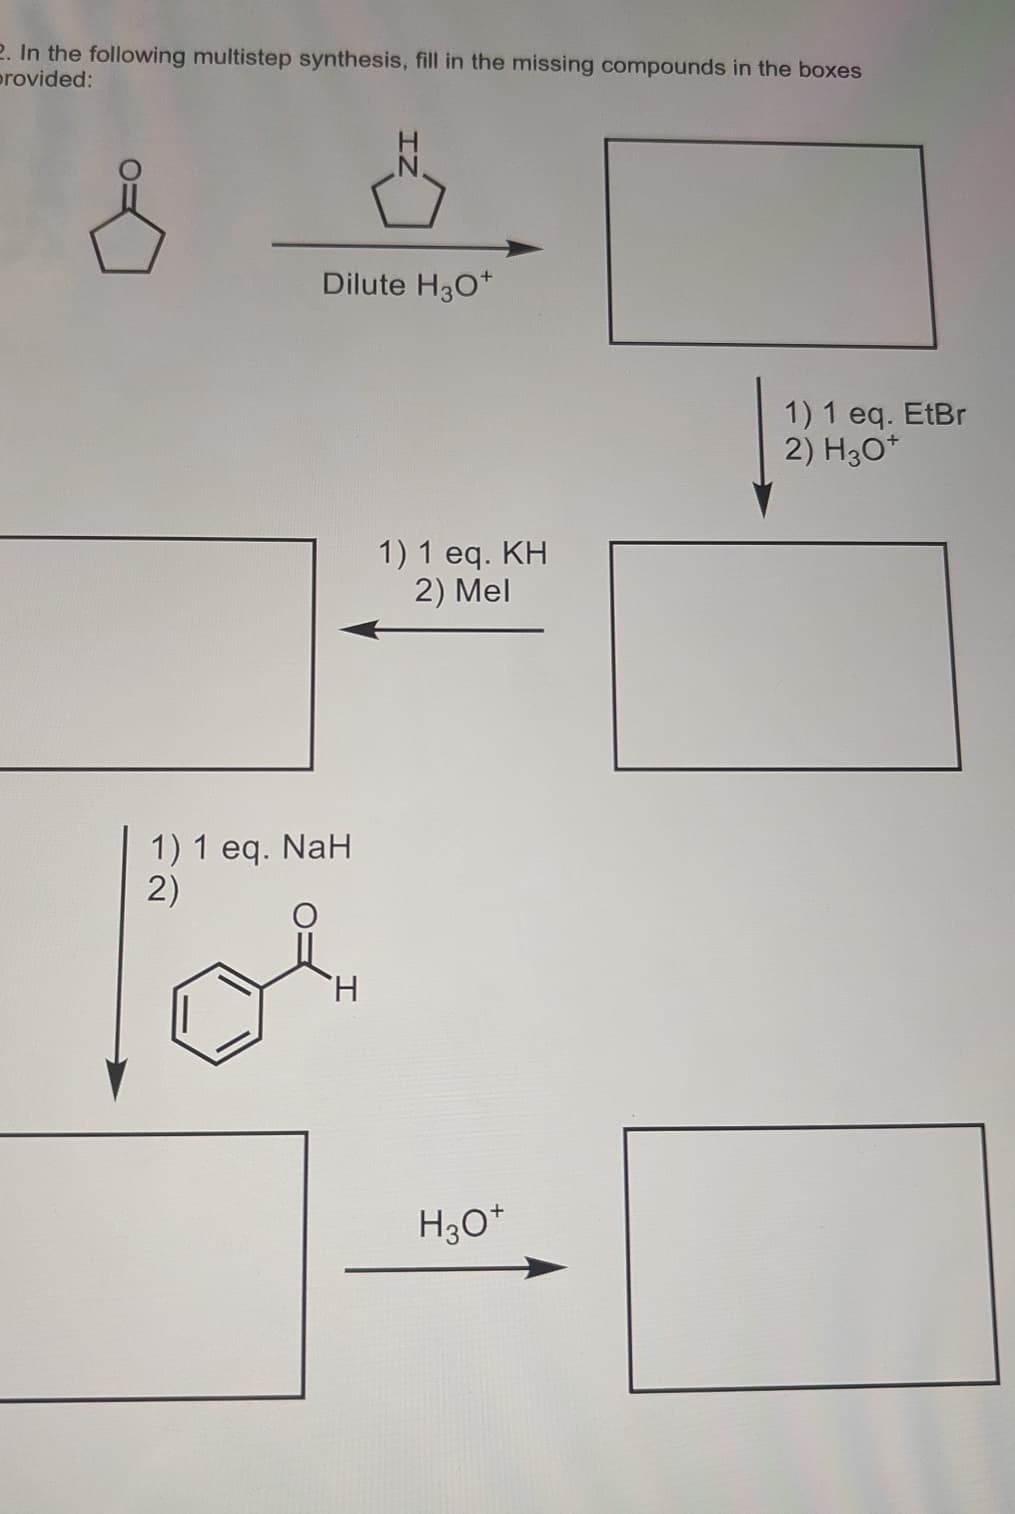 2. In the following multistep synthesis, fill in the missing compounds in the boxes
provided:
Dilute H3O+
1) 1 eq. NaH
2)
H
1) 1 eq. KH
2) Mel
H3O+
1) 1 eq. EtBr
2) H30*